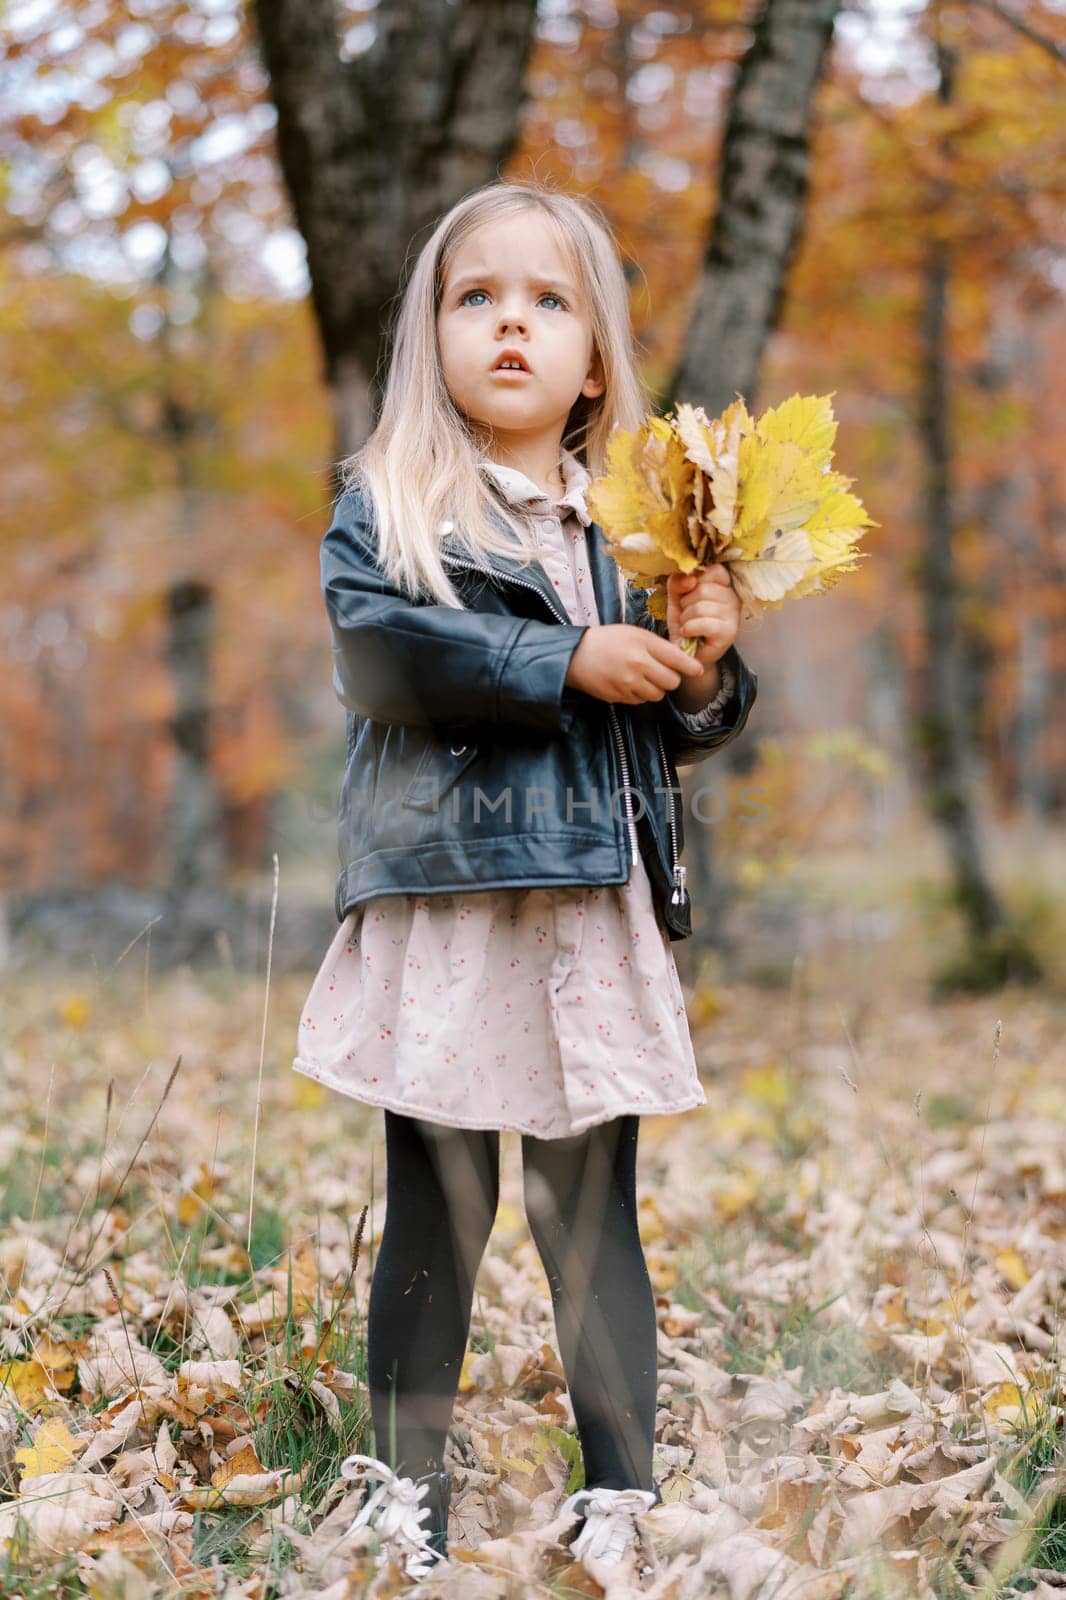 Little girl with a bouquet of yellow leaves stands in the park and looks up with anxiety by Nadtochiy